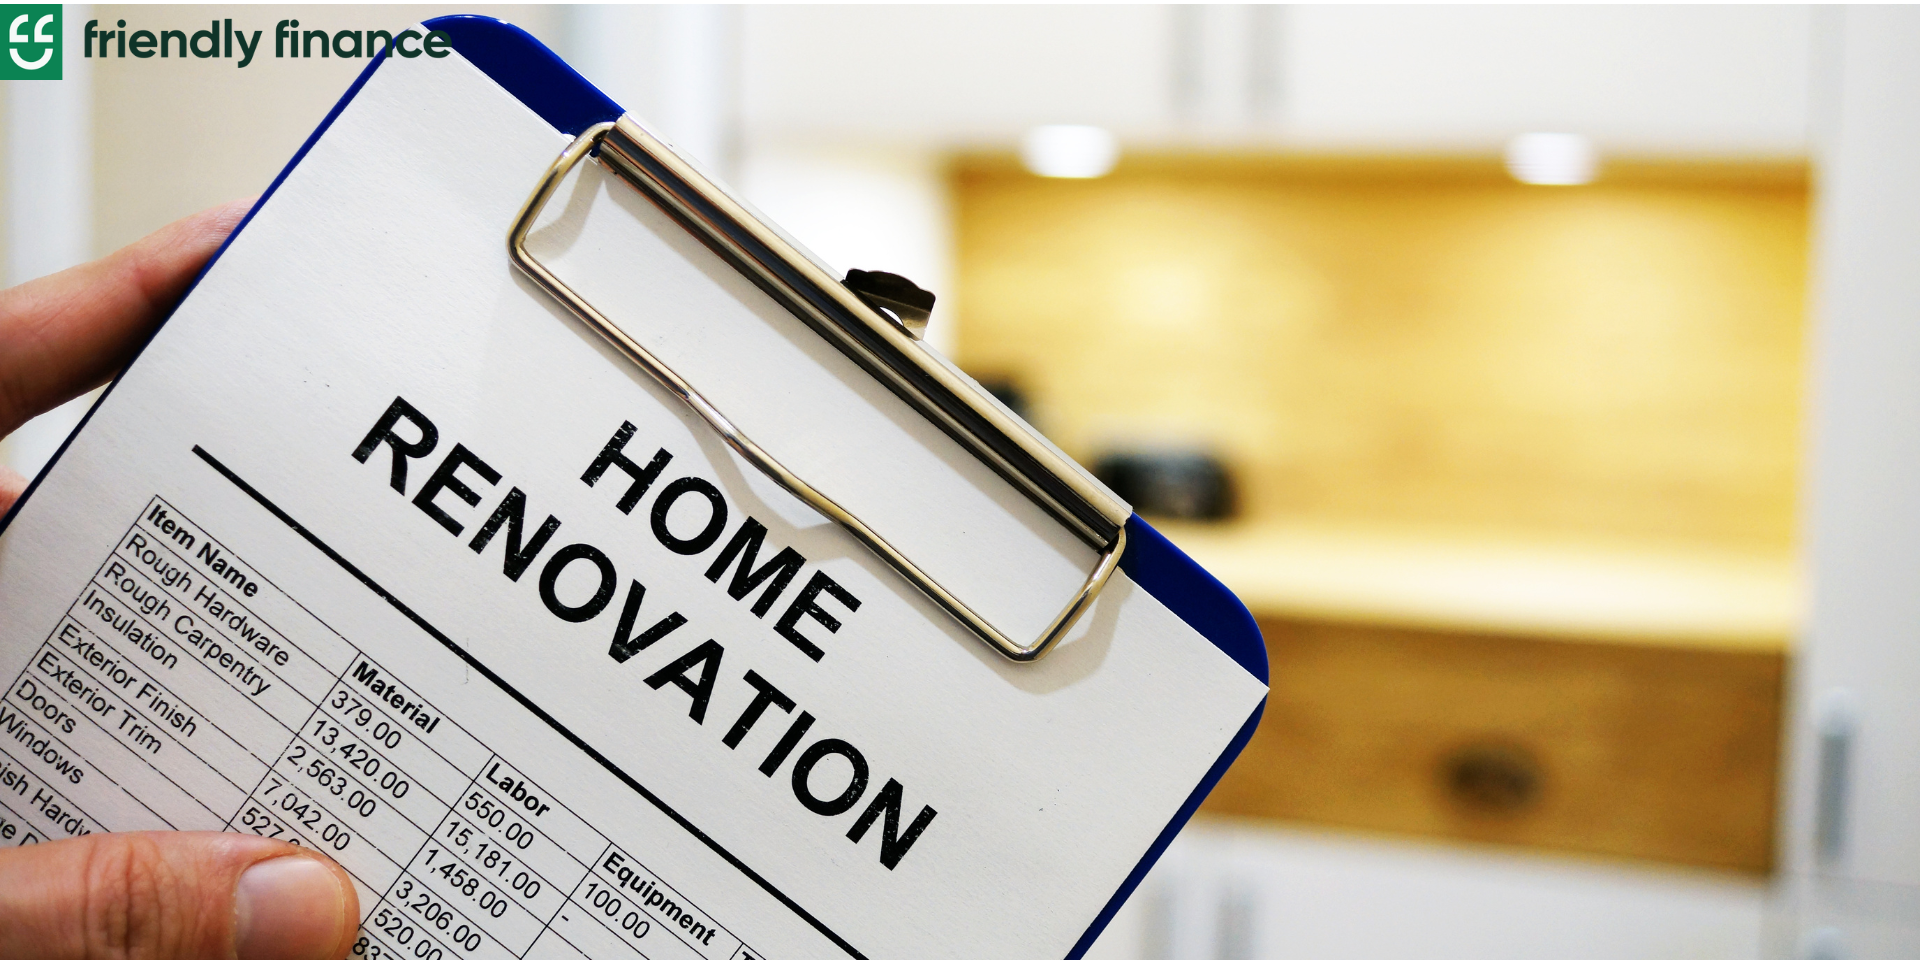 A document about home renovation costs